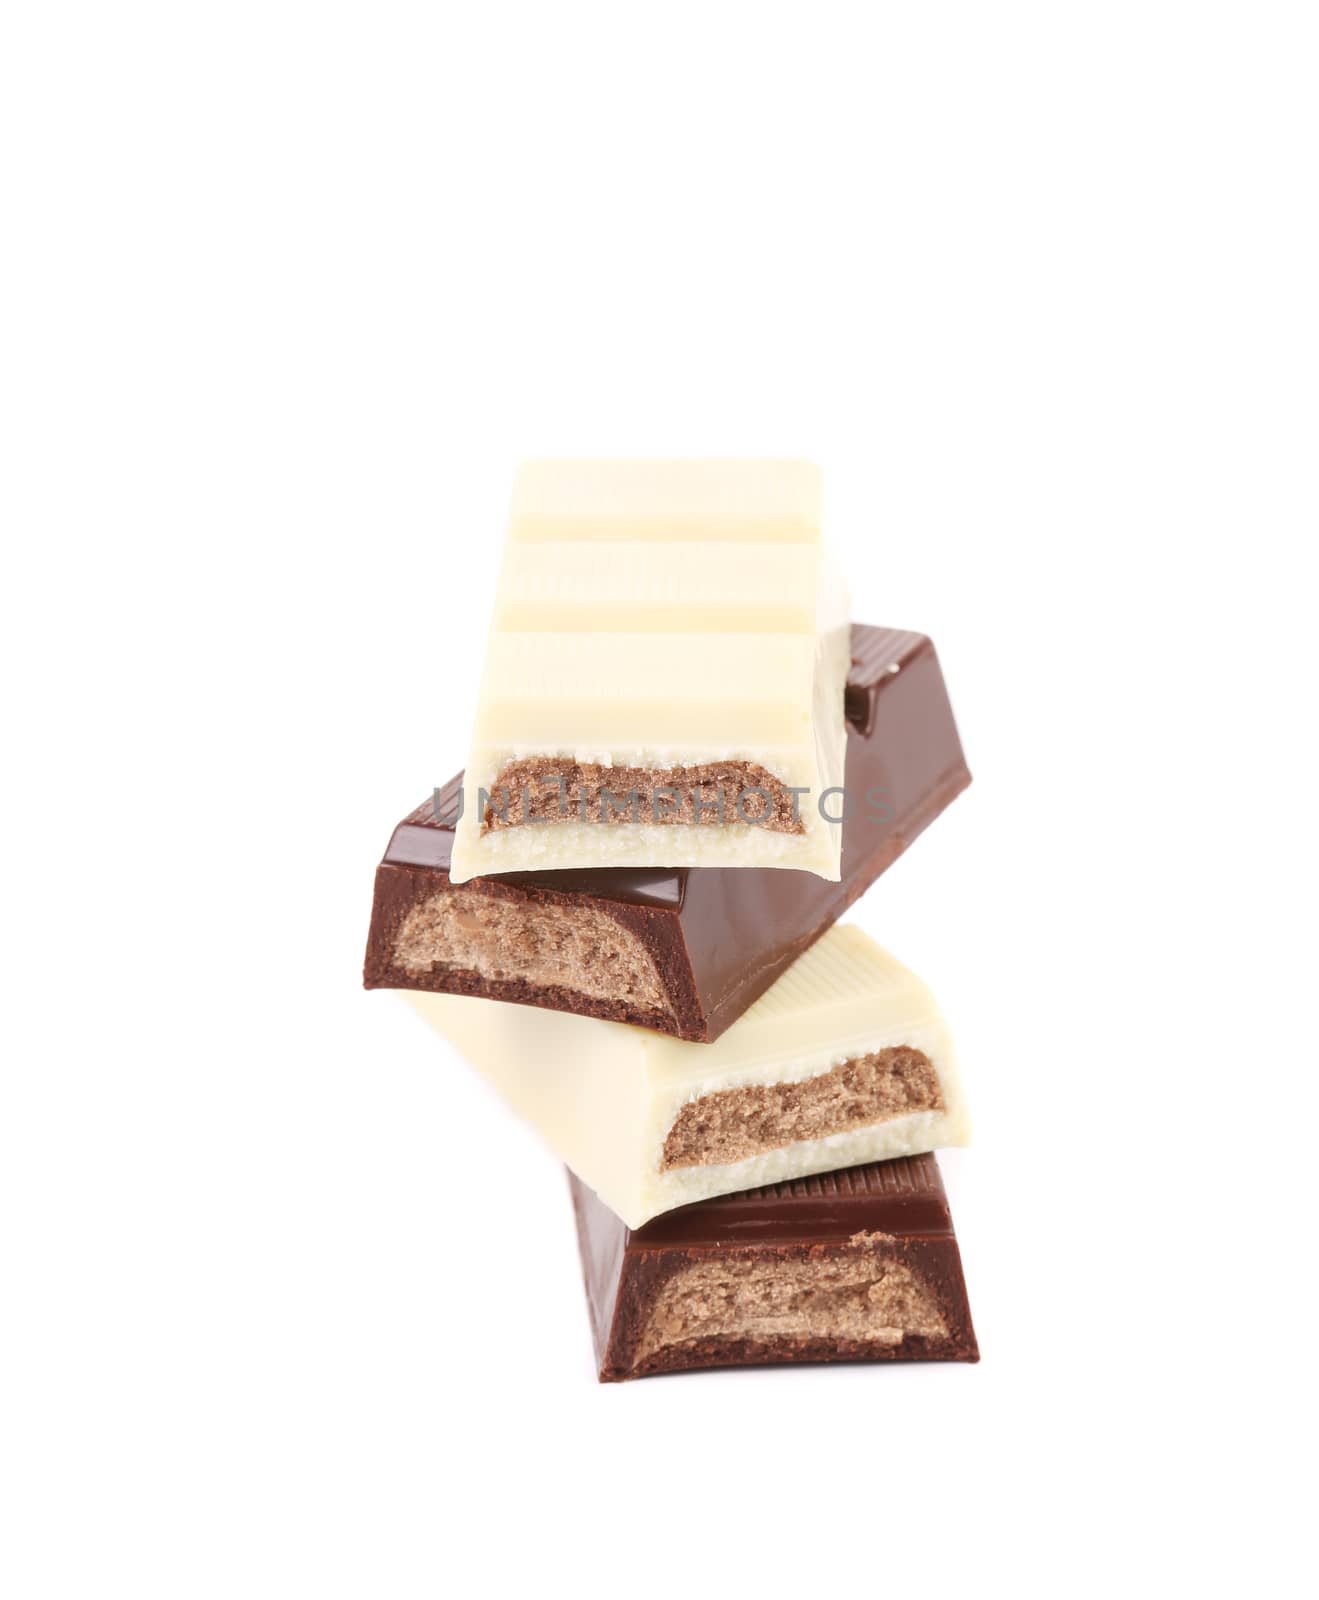 Black and white chocolate bars with filling. by indigolotos